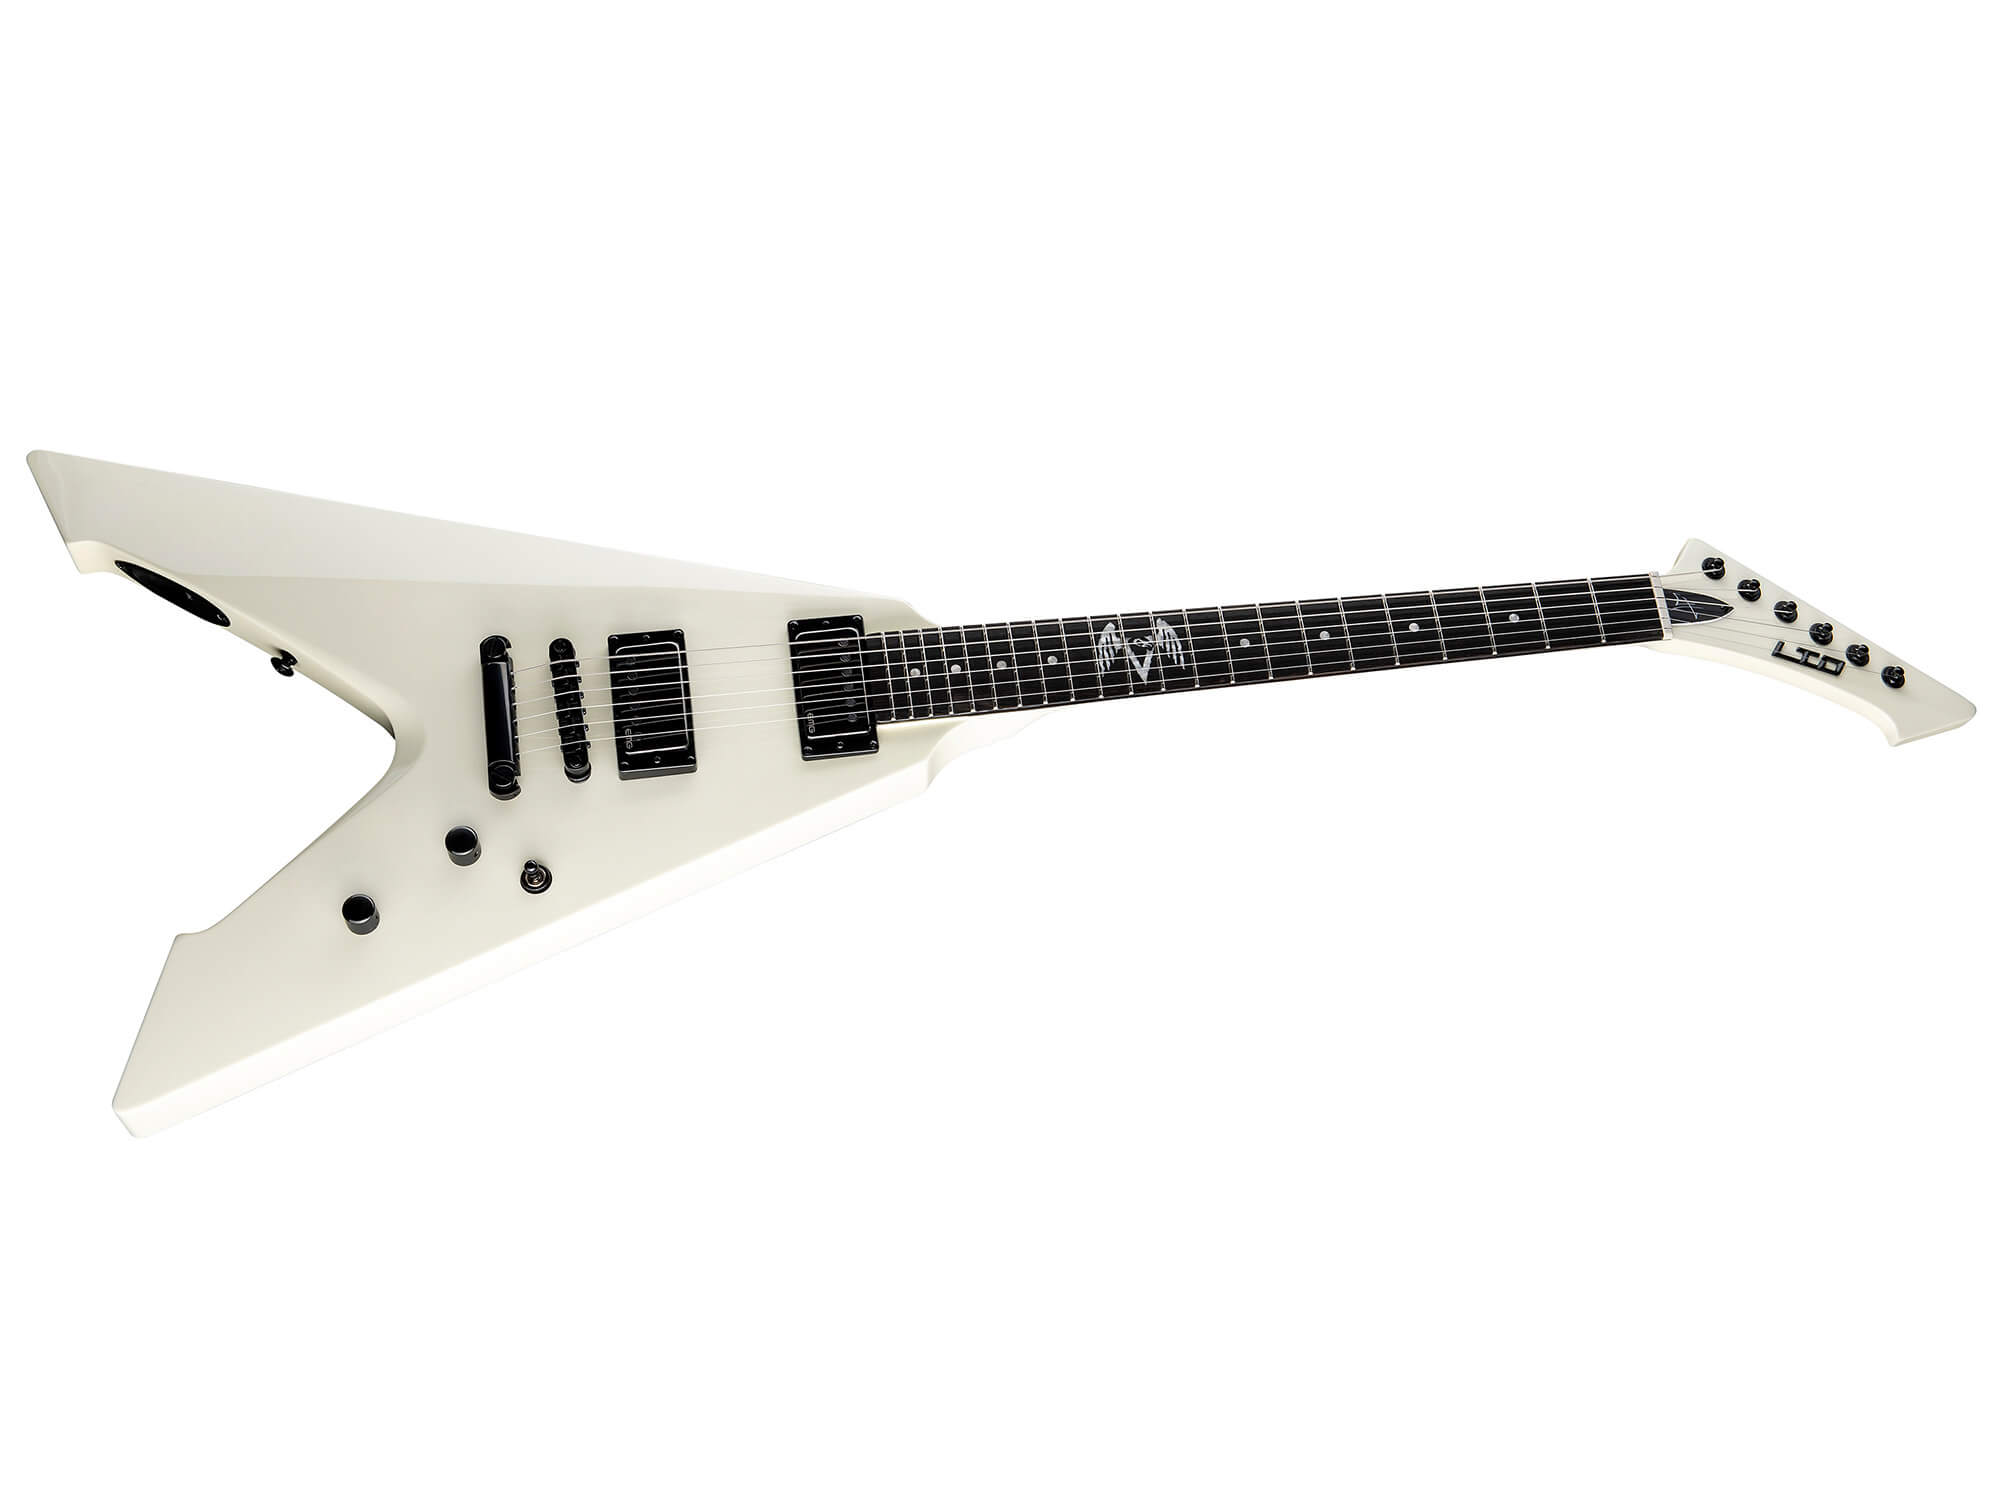 James Hetfield Signature Vulture in Olympic White